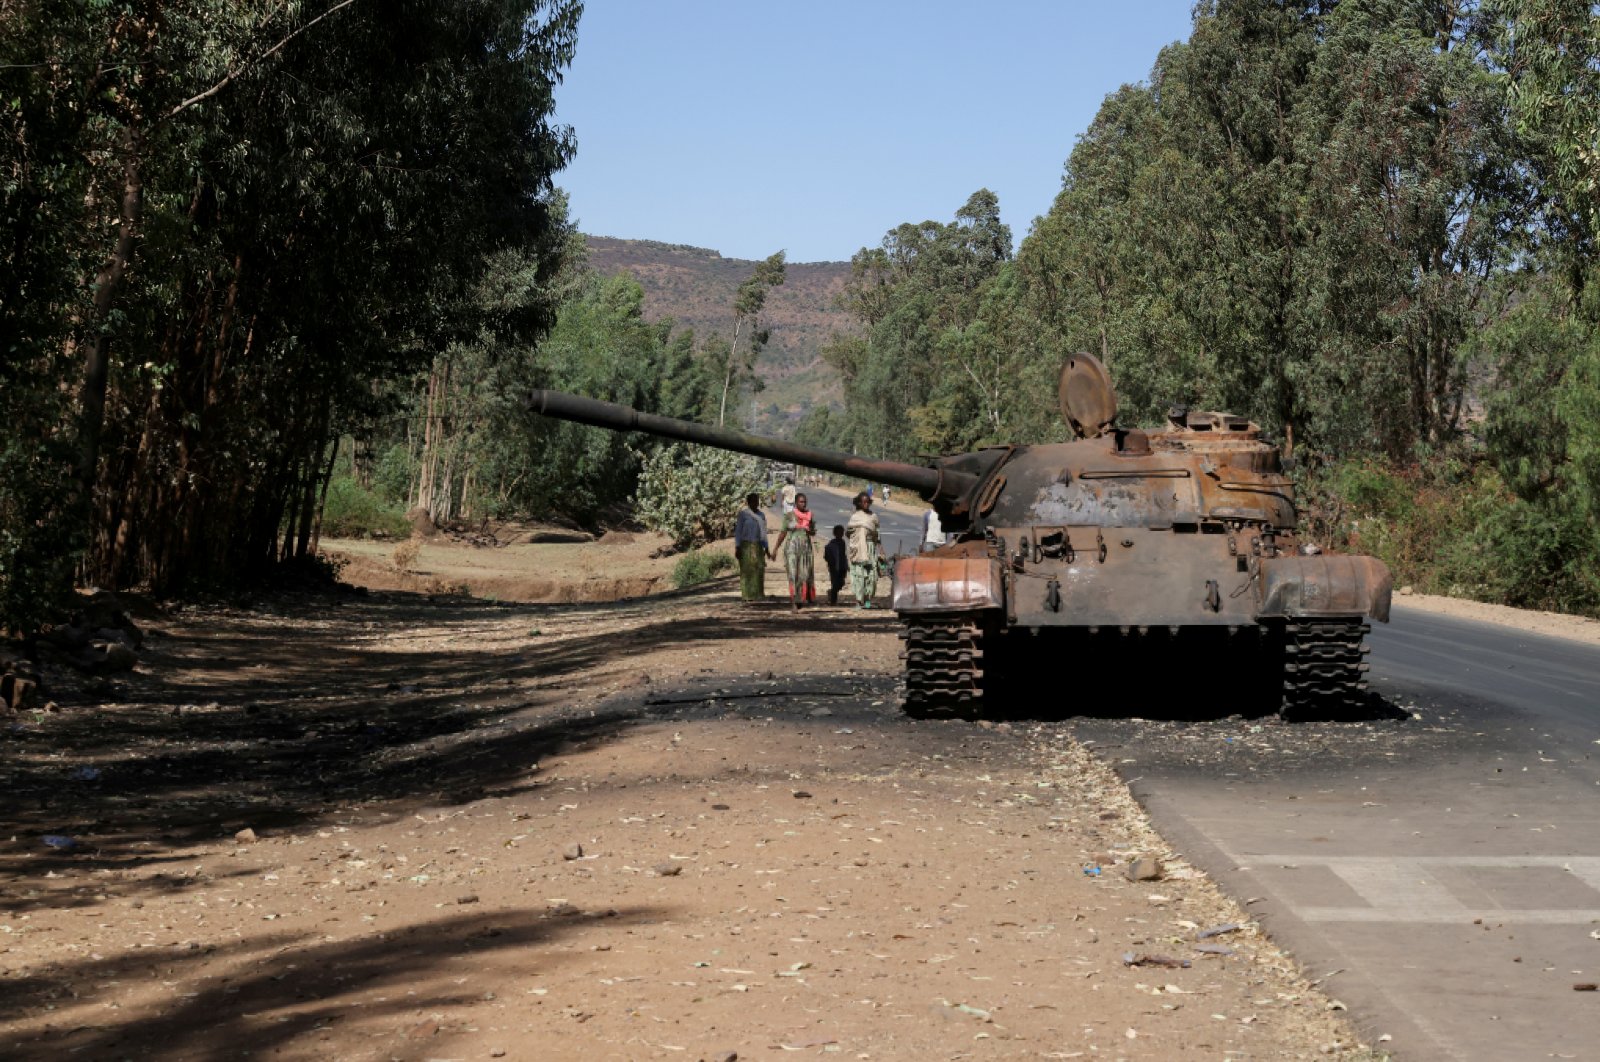 A burned tank stands near the town of Adwa, Tigray region, Ethiopia, March 18, 2021. (Reuters Photo)